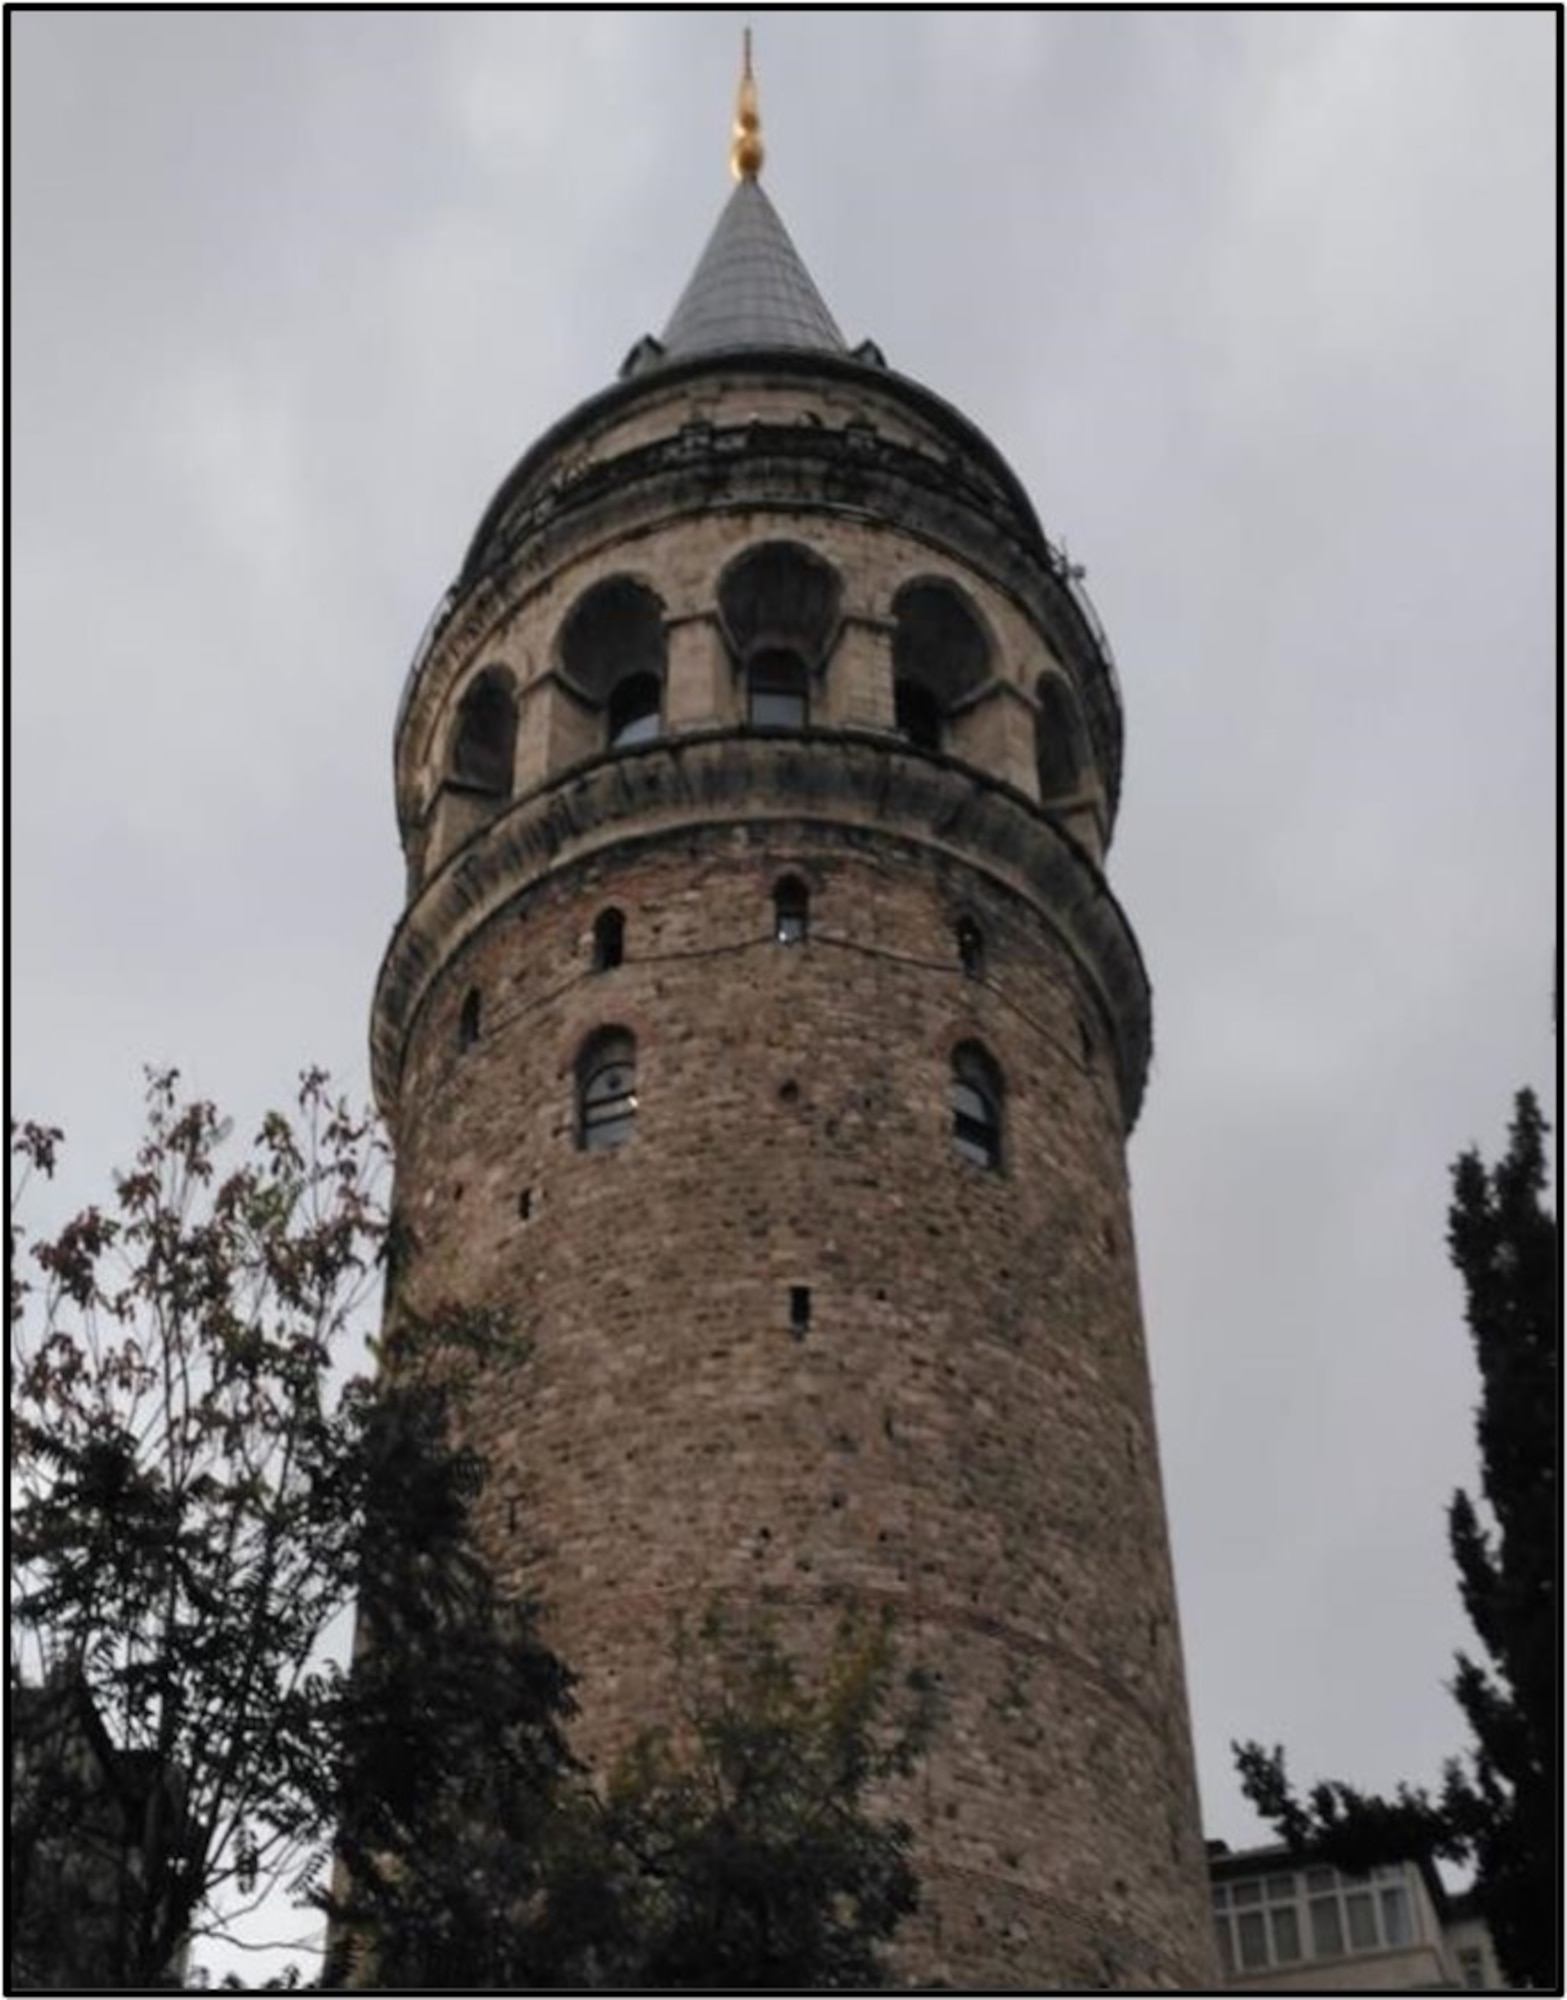 A view of the Galata Tower, overlooking the Bosphorus, just after İstiklal Street.  The Galata Tower, which was once used as a fire watch-tower, was built by the Genoese in the 14th century. (U.S. Air Force photo by Tanju Varlıklı)